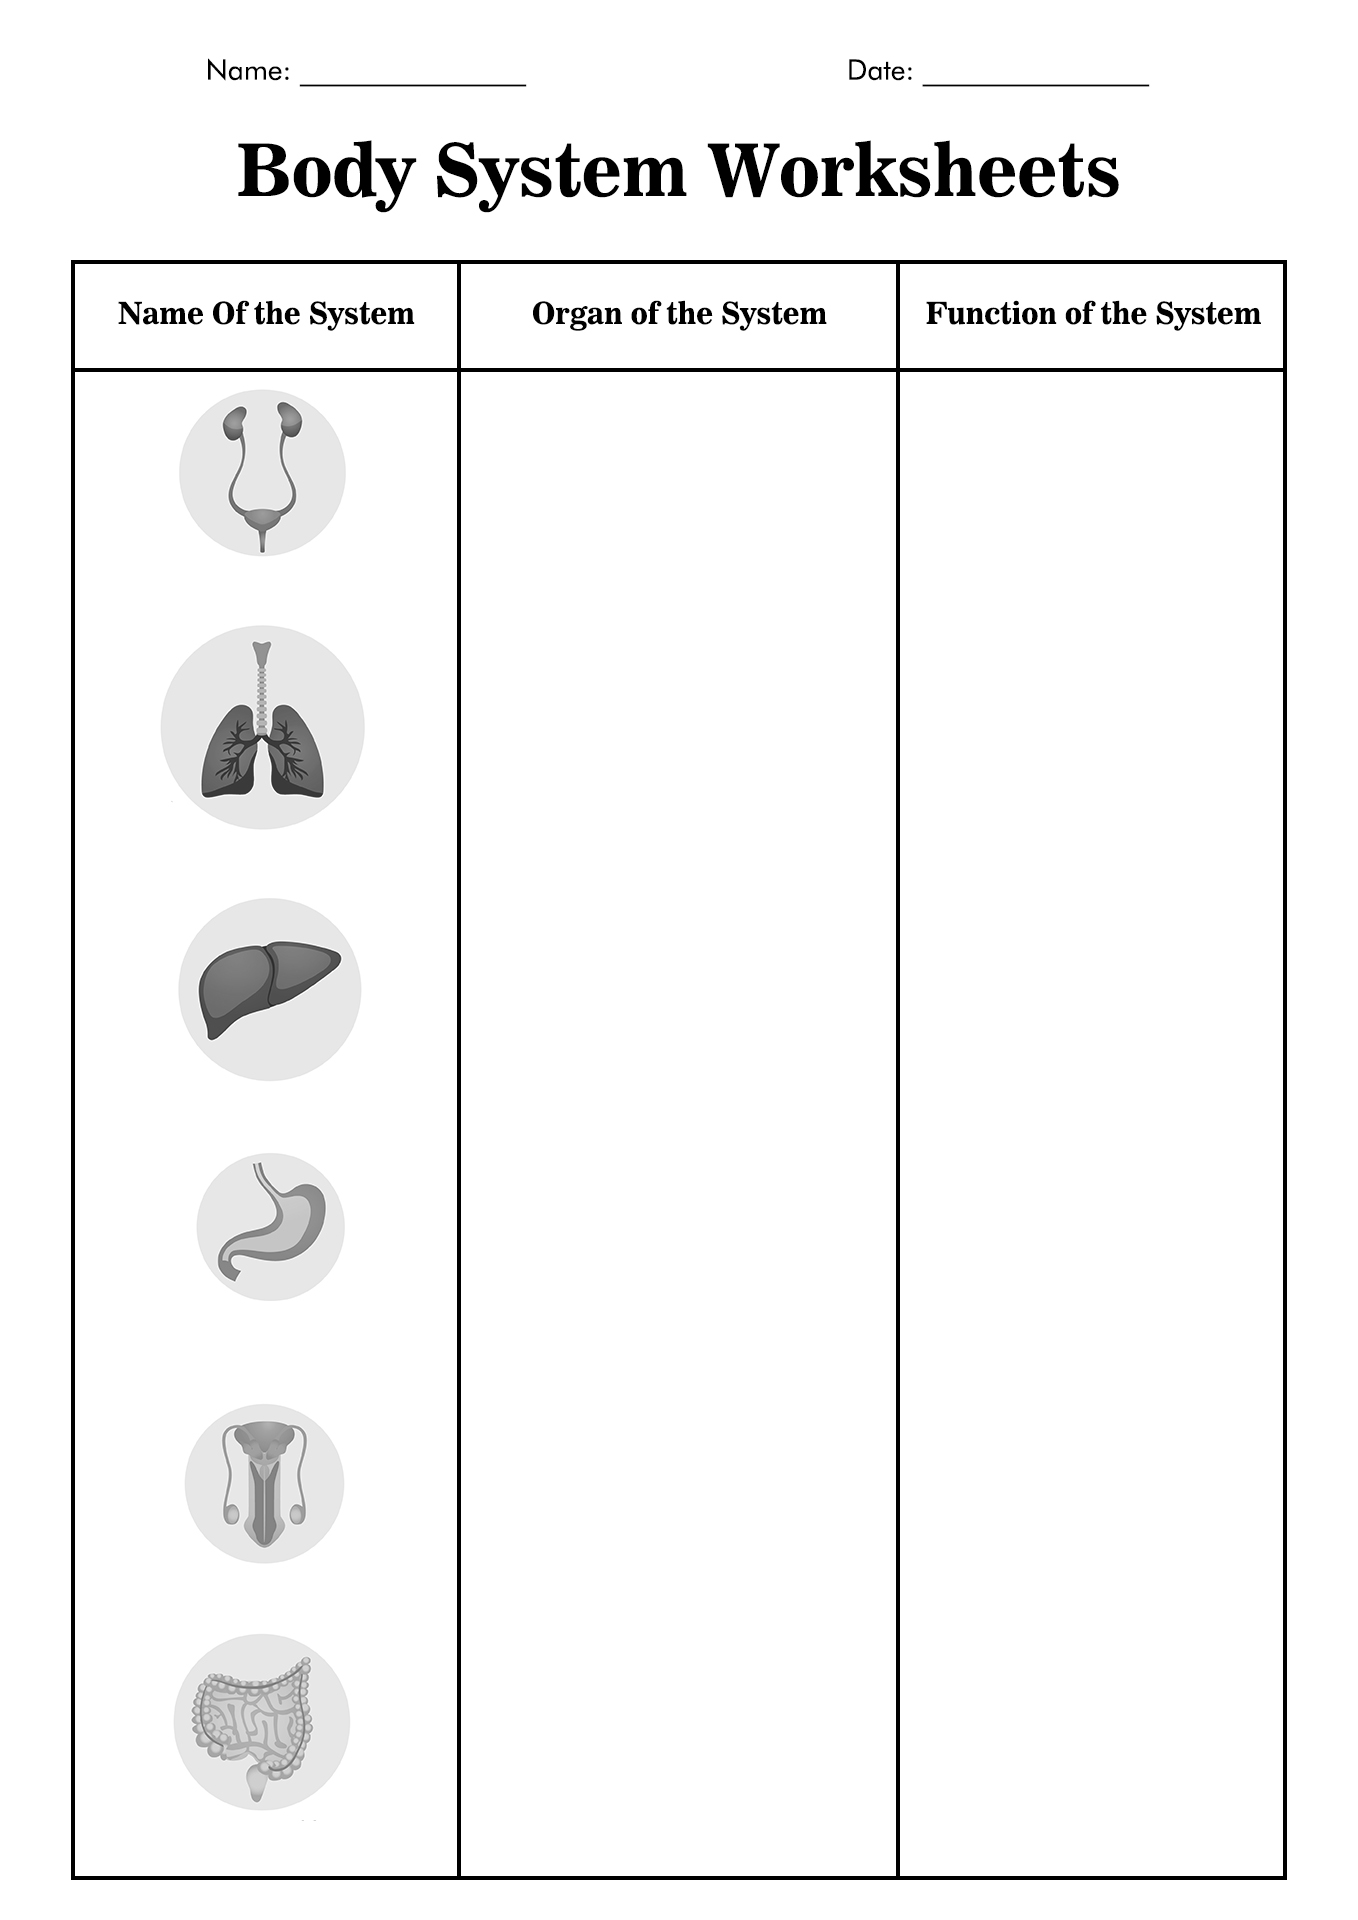 Body Systems Worksheets Image